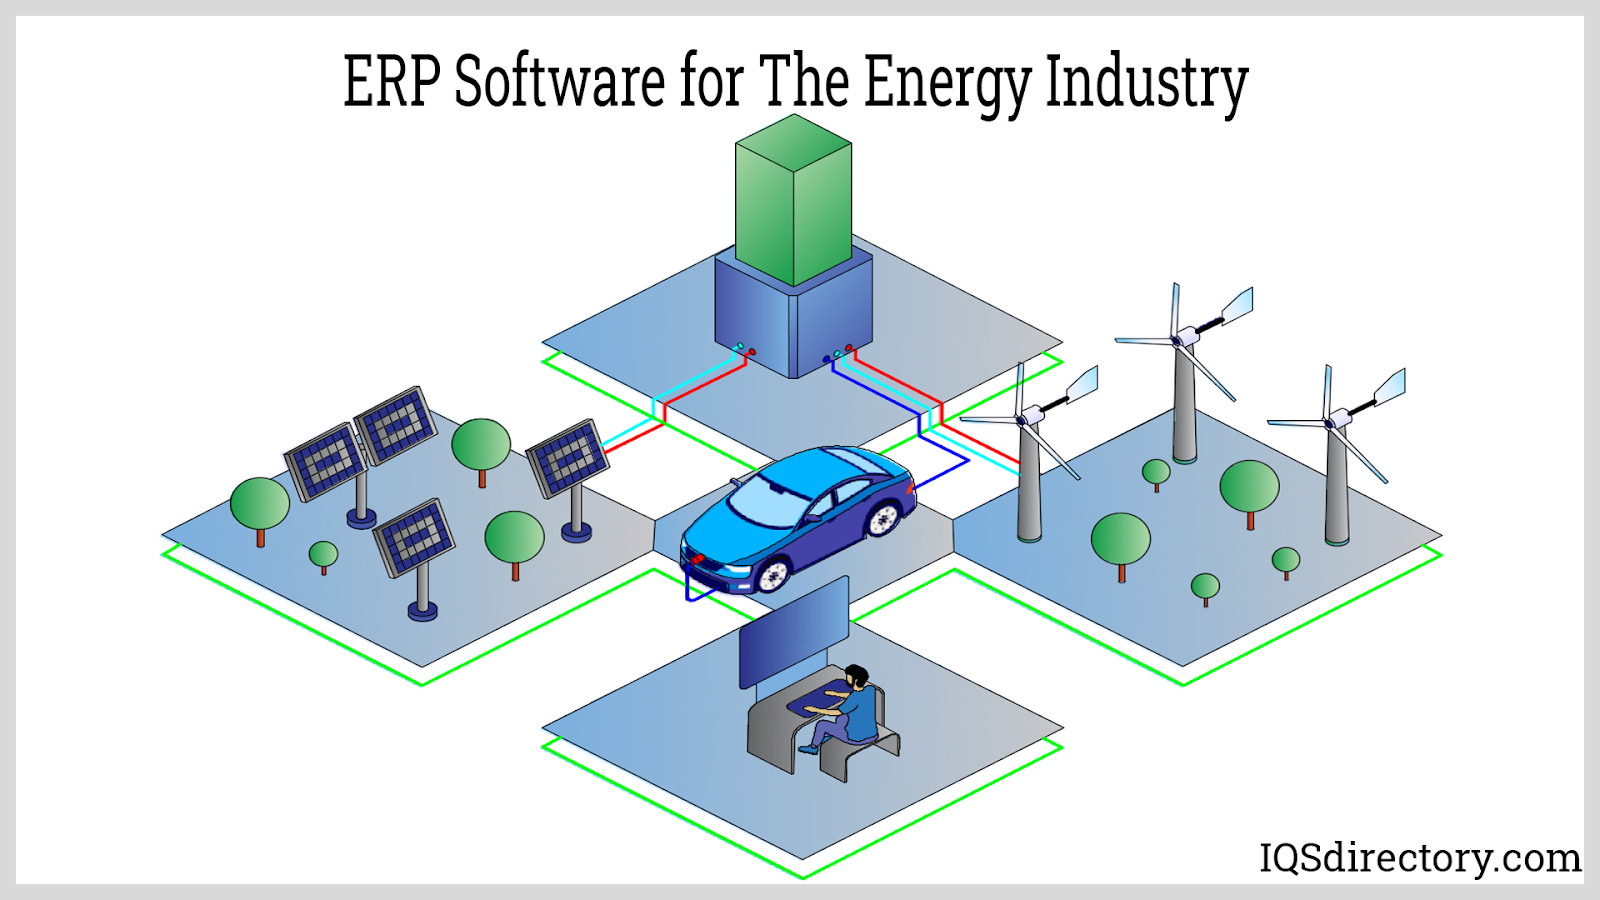 ERP Software for The Energy Industry